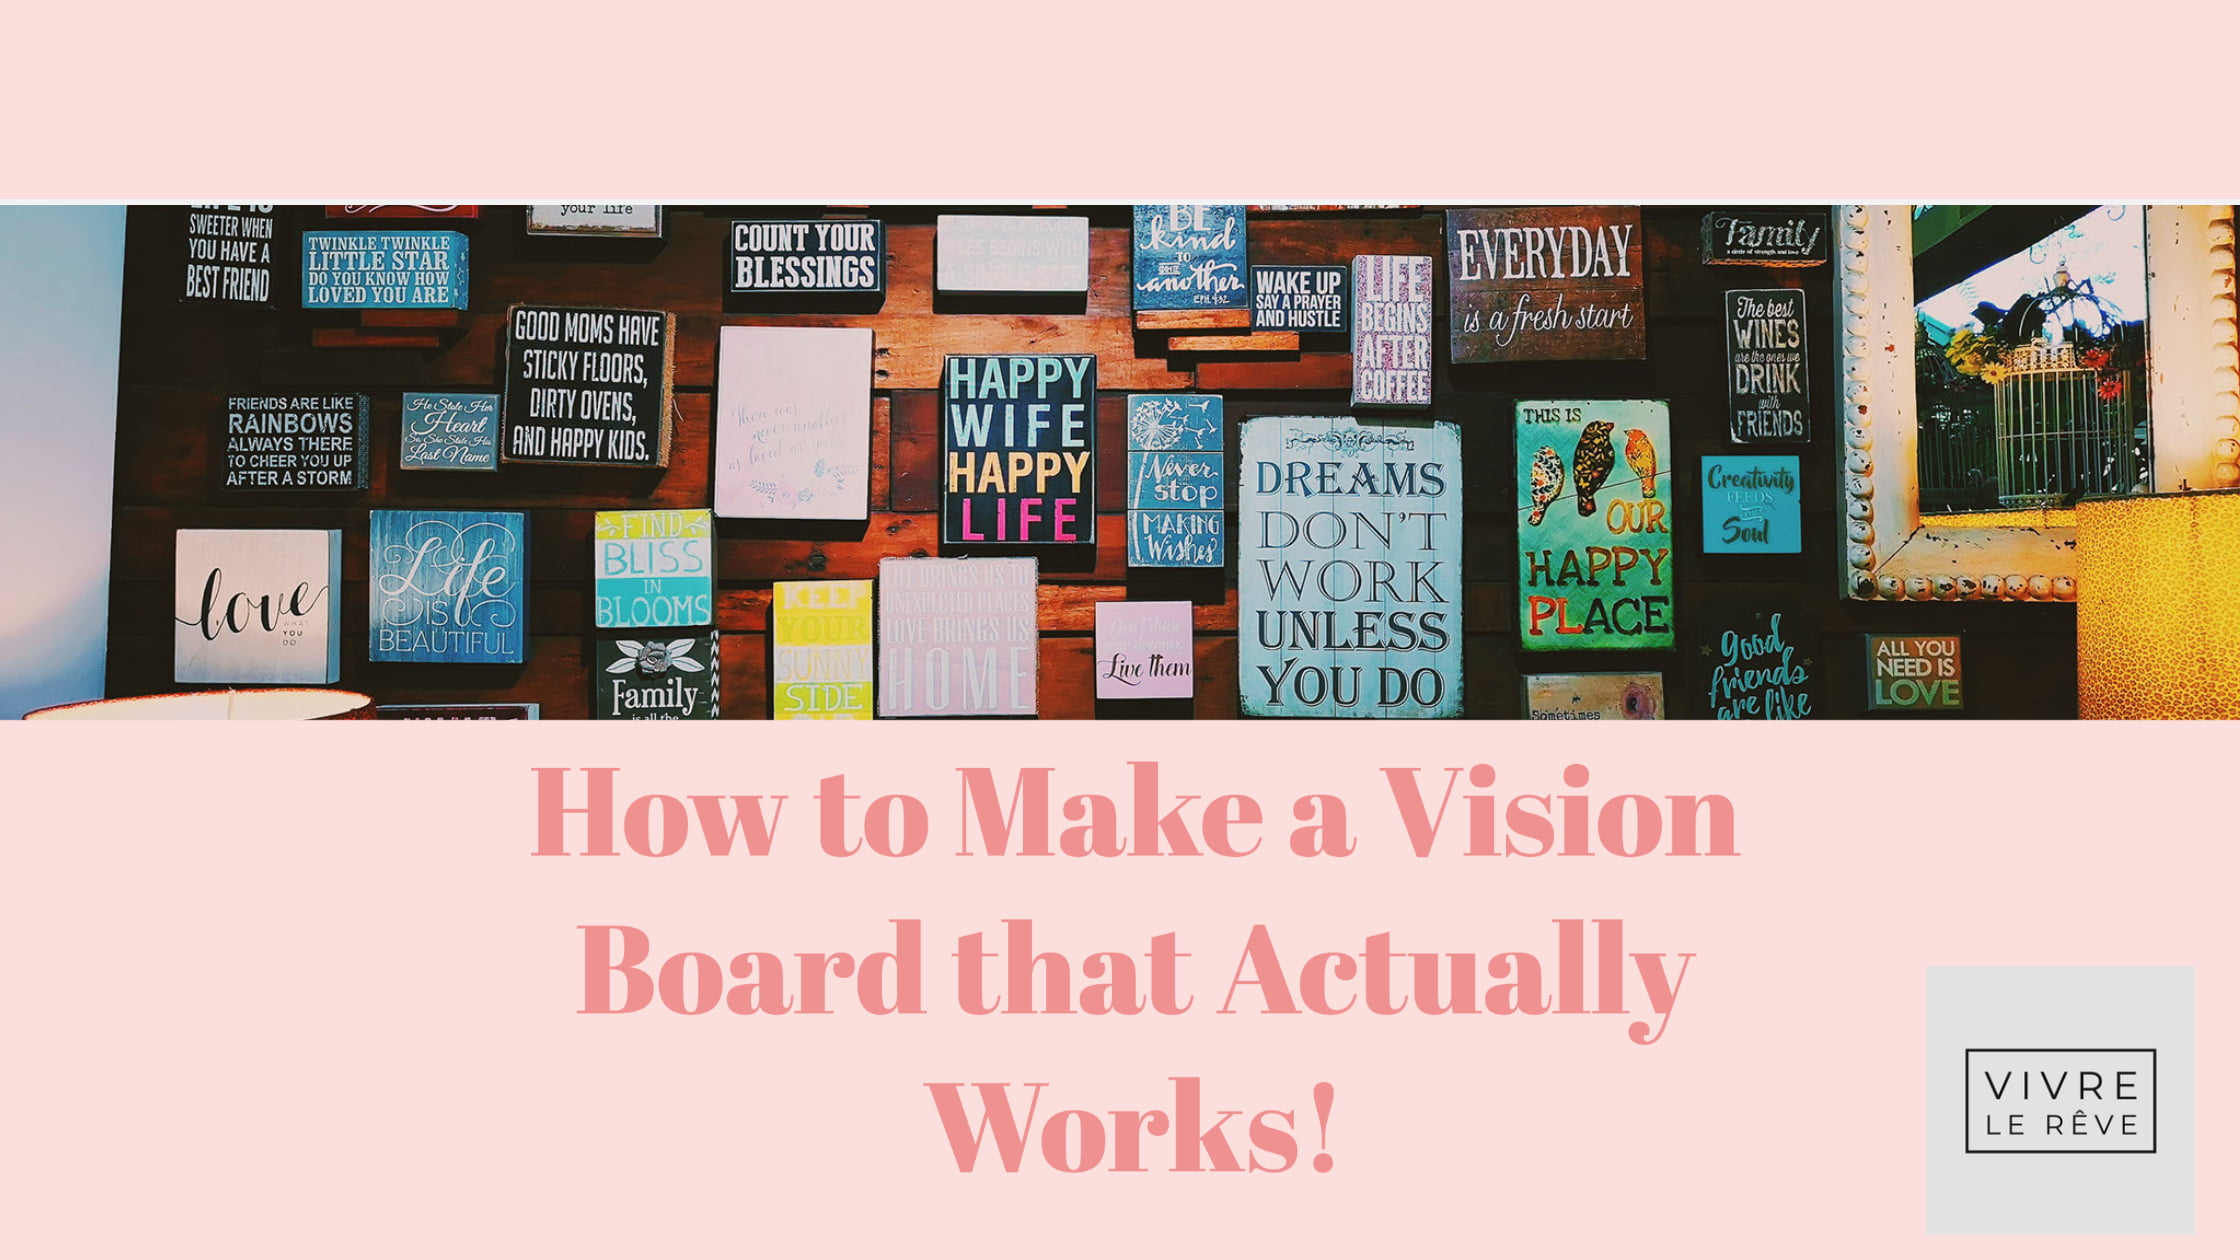 How to Make a Vision Board that Actually Works!